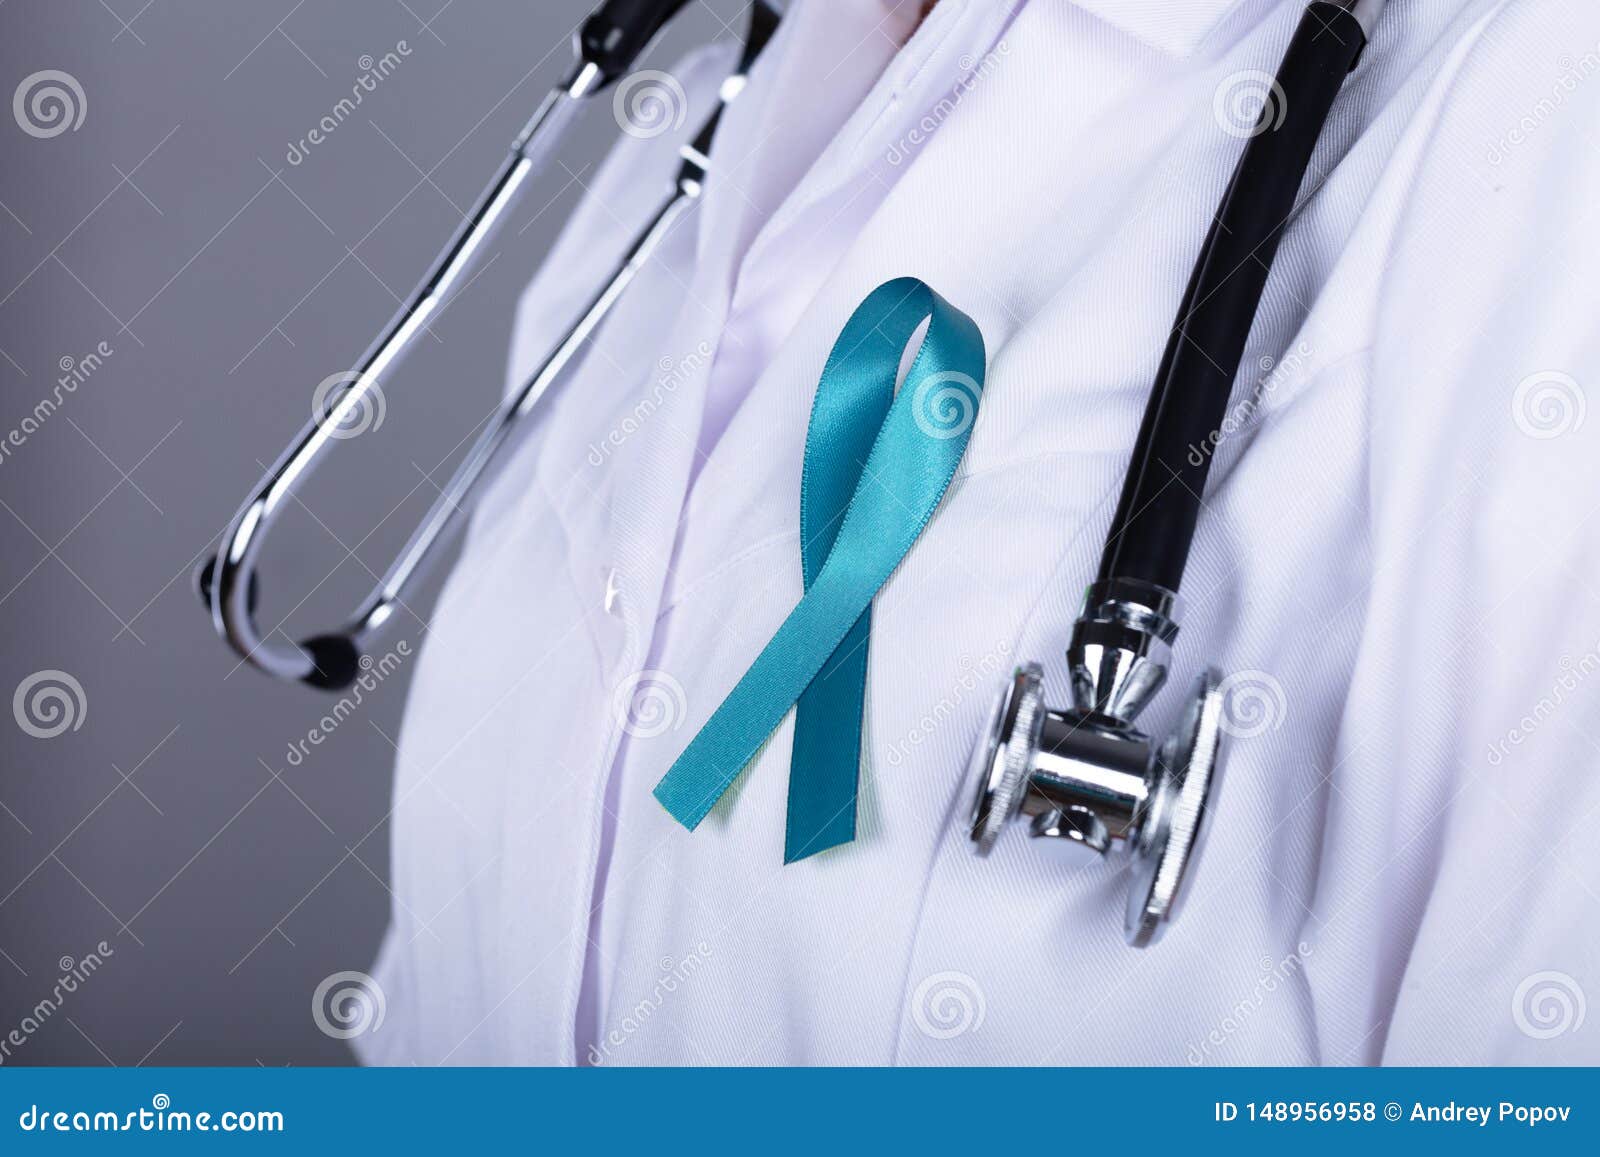 doctor supporting ovarian cancer awareness